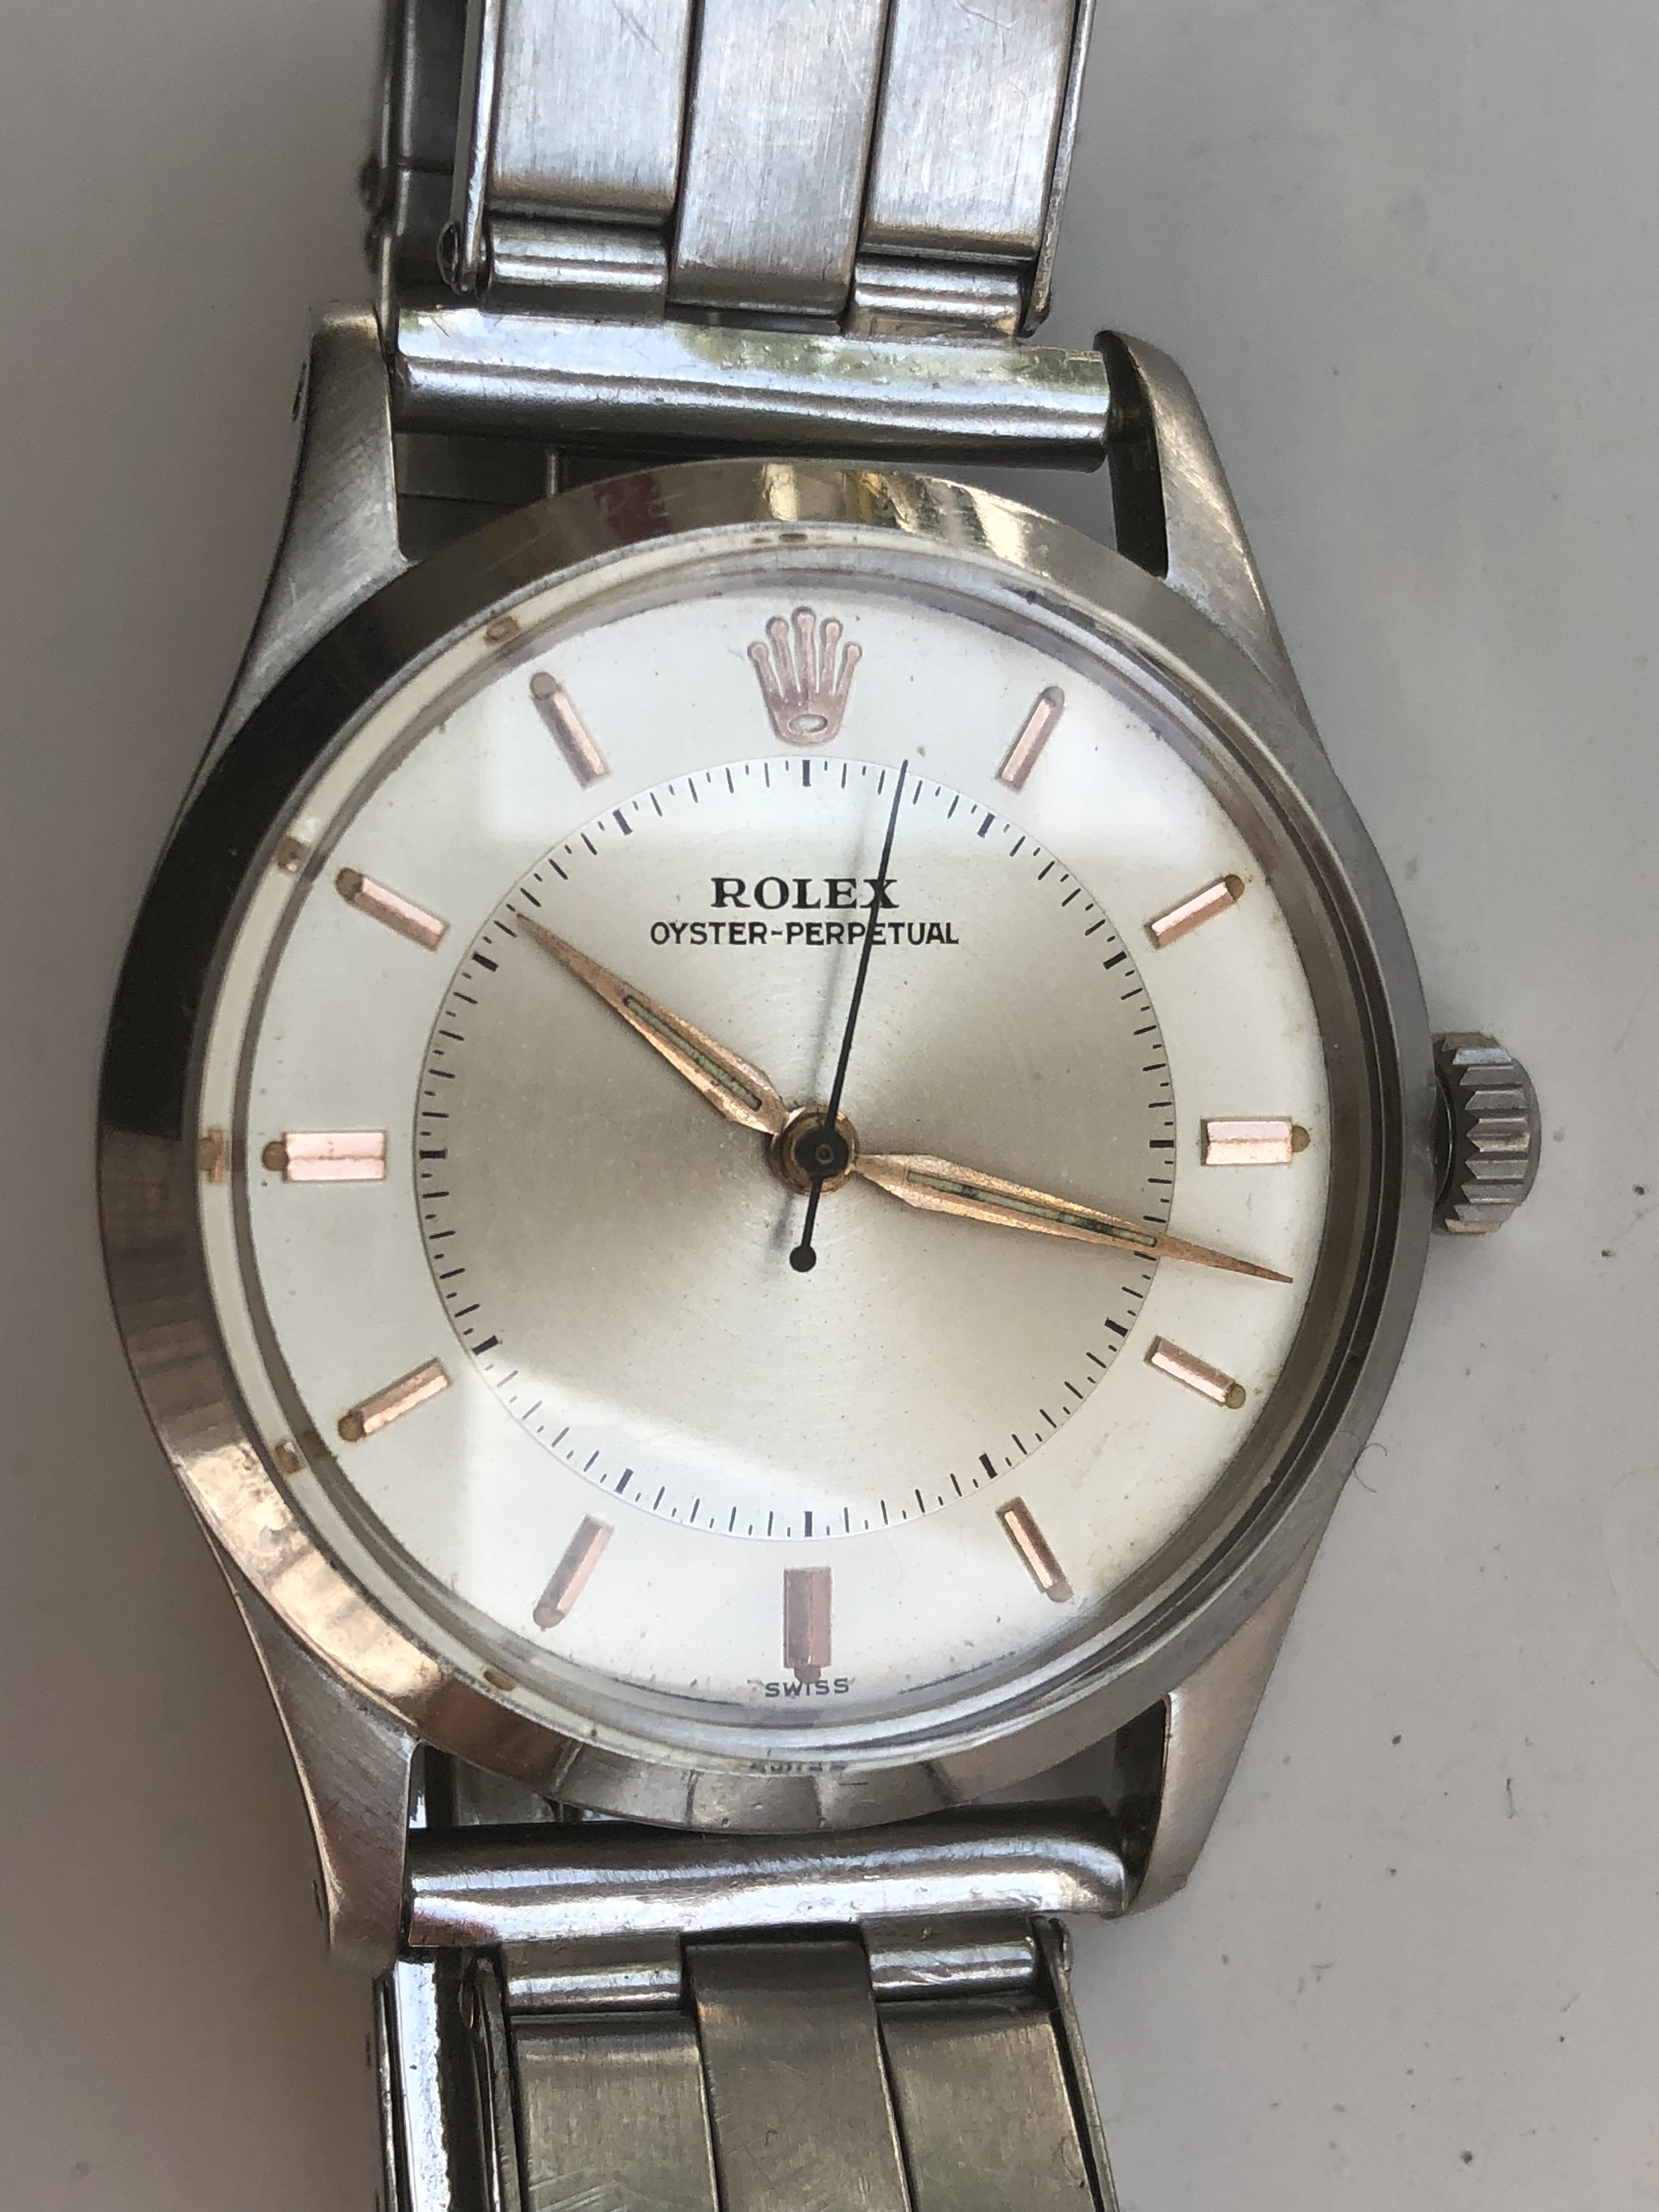 1958 Rolex Oyster Perpetual Ref. 6532 